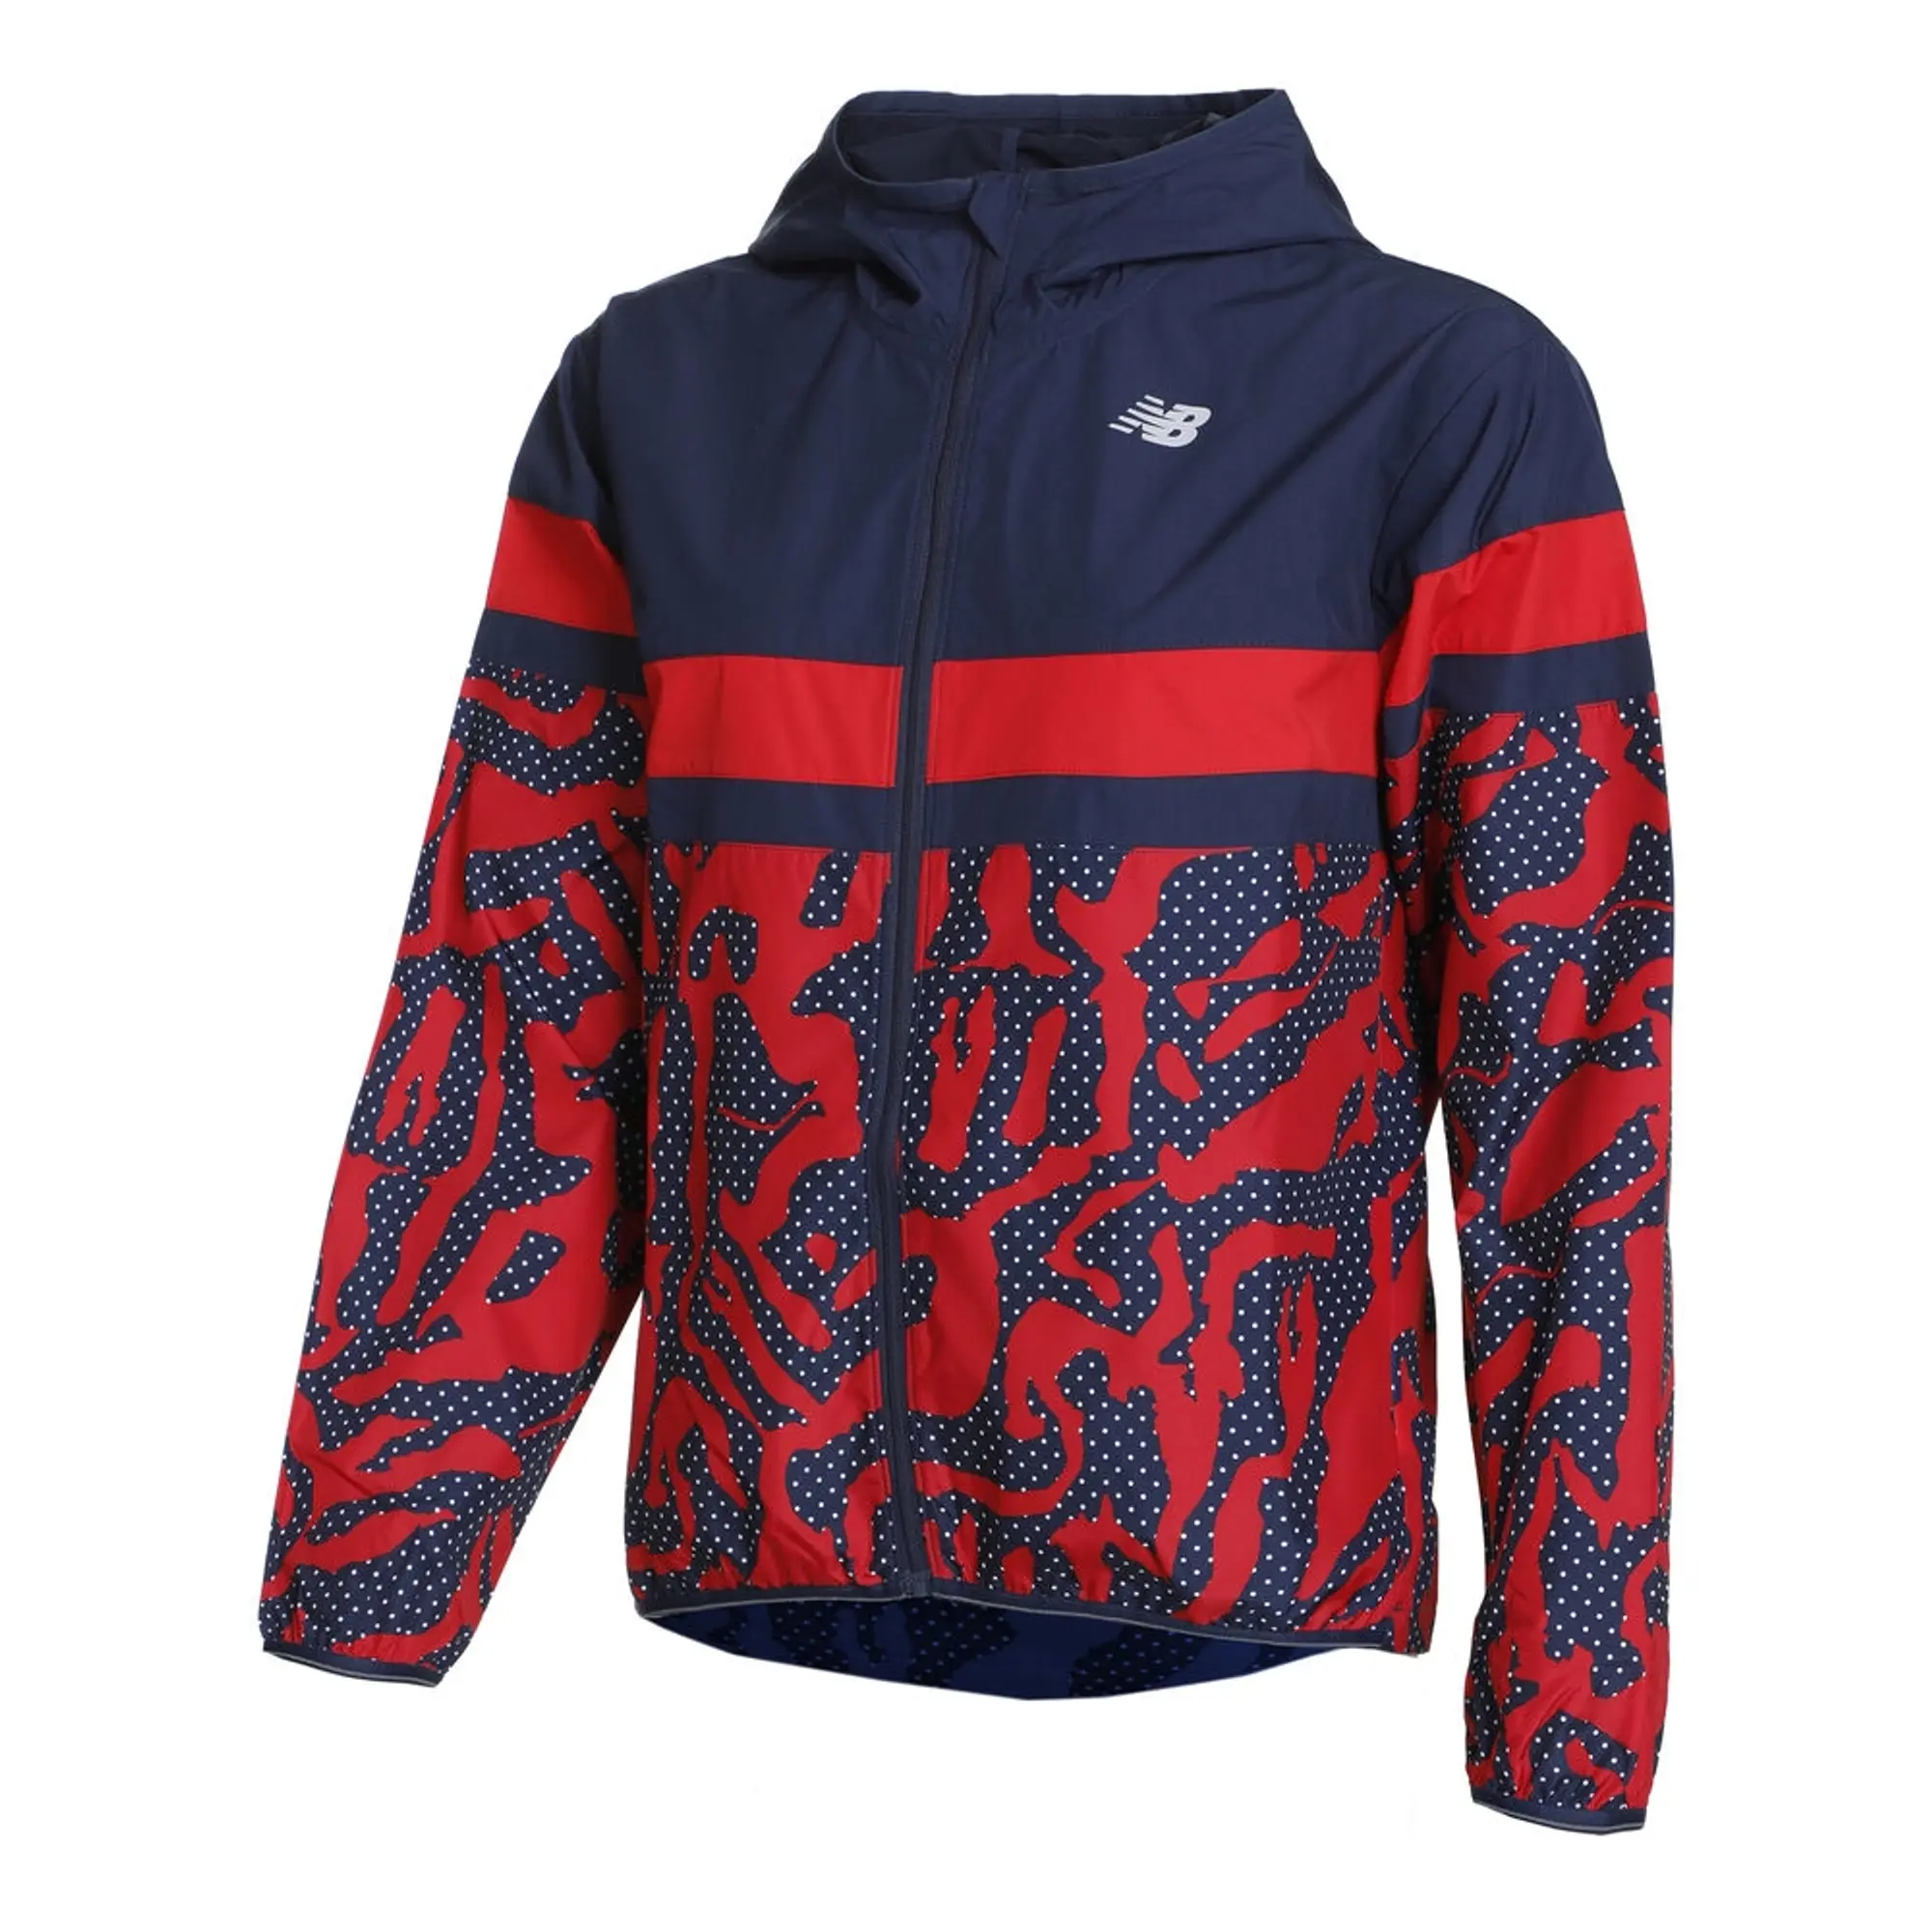 New Balance Printed Accelerate Running Jacket Women - Red, Blue